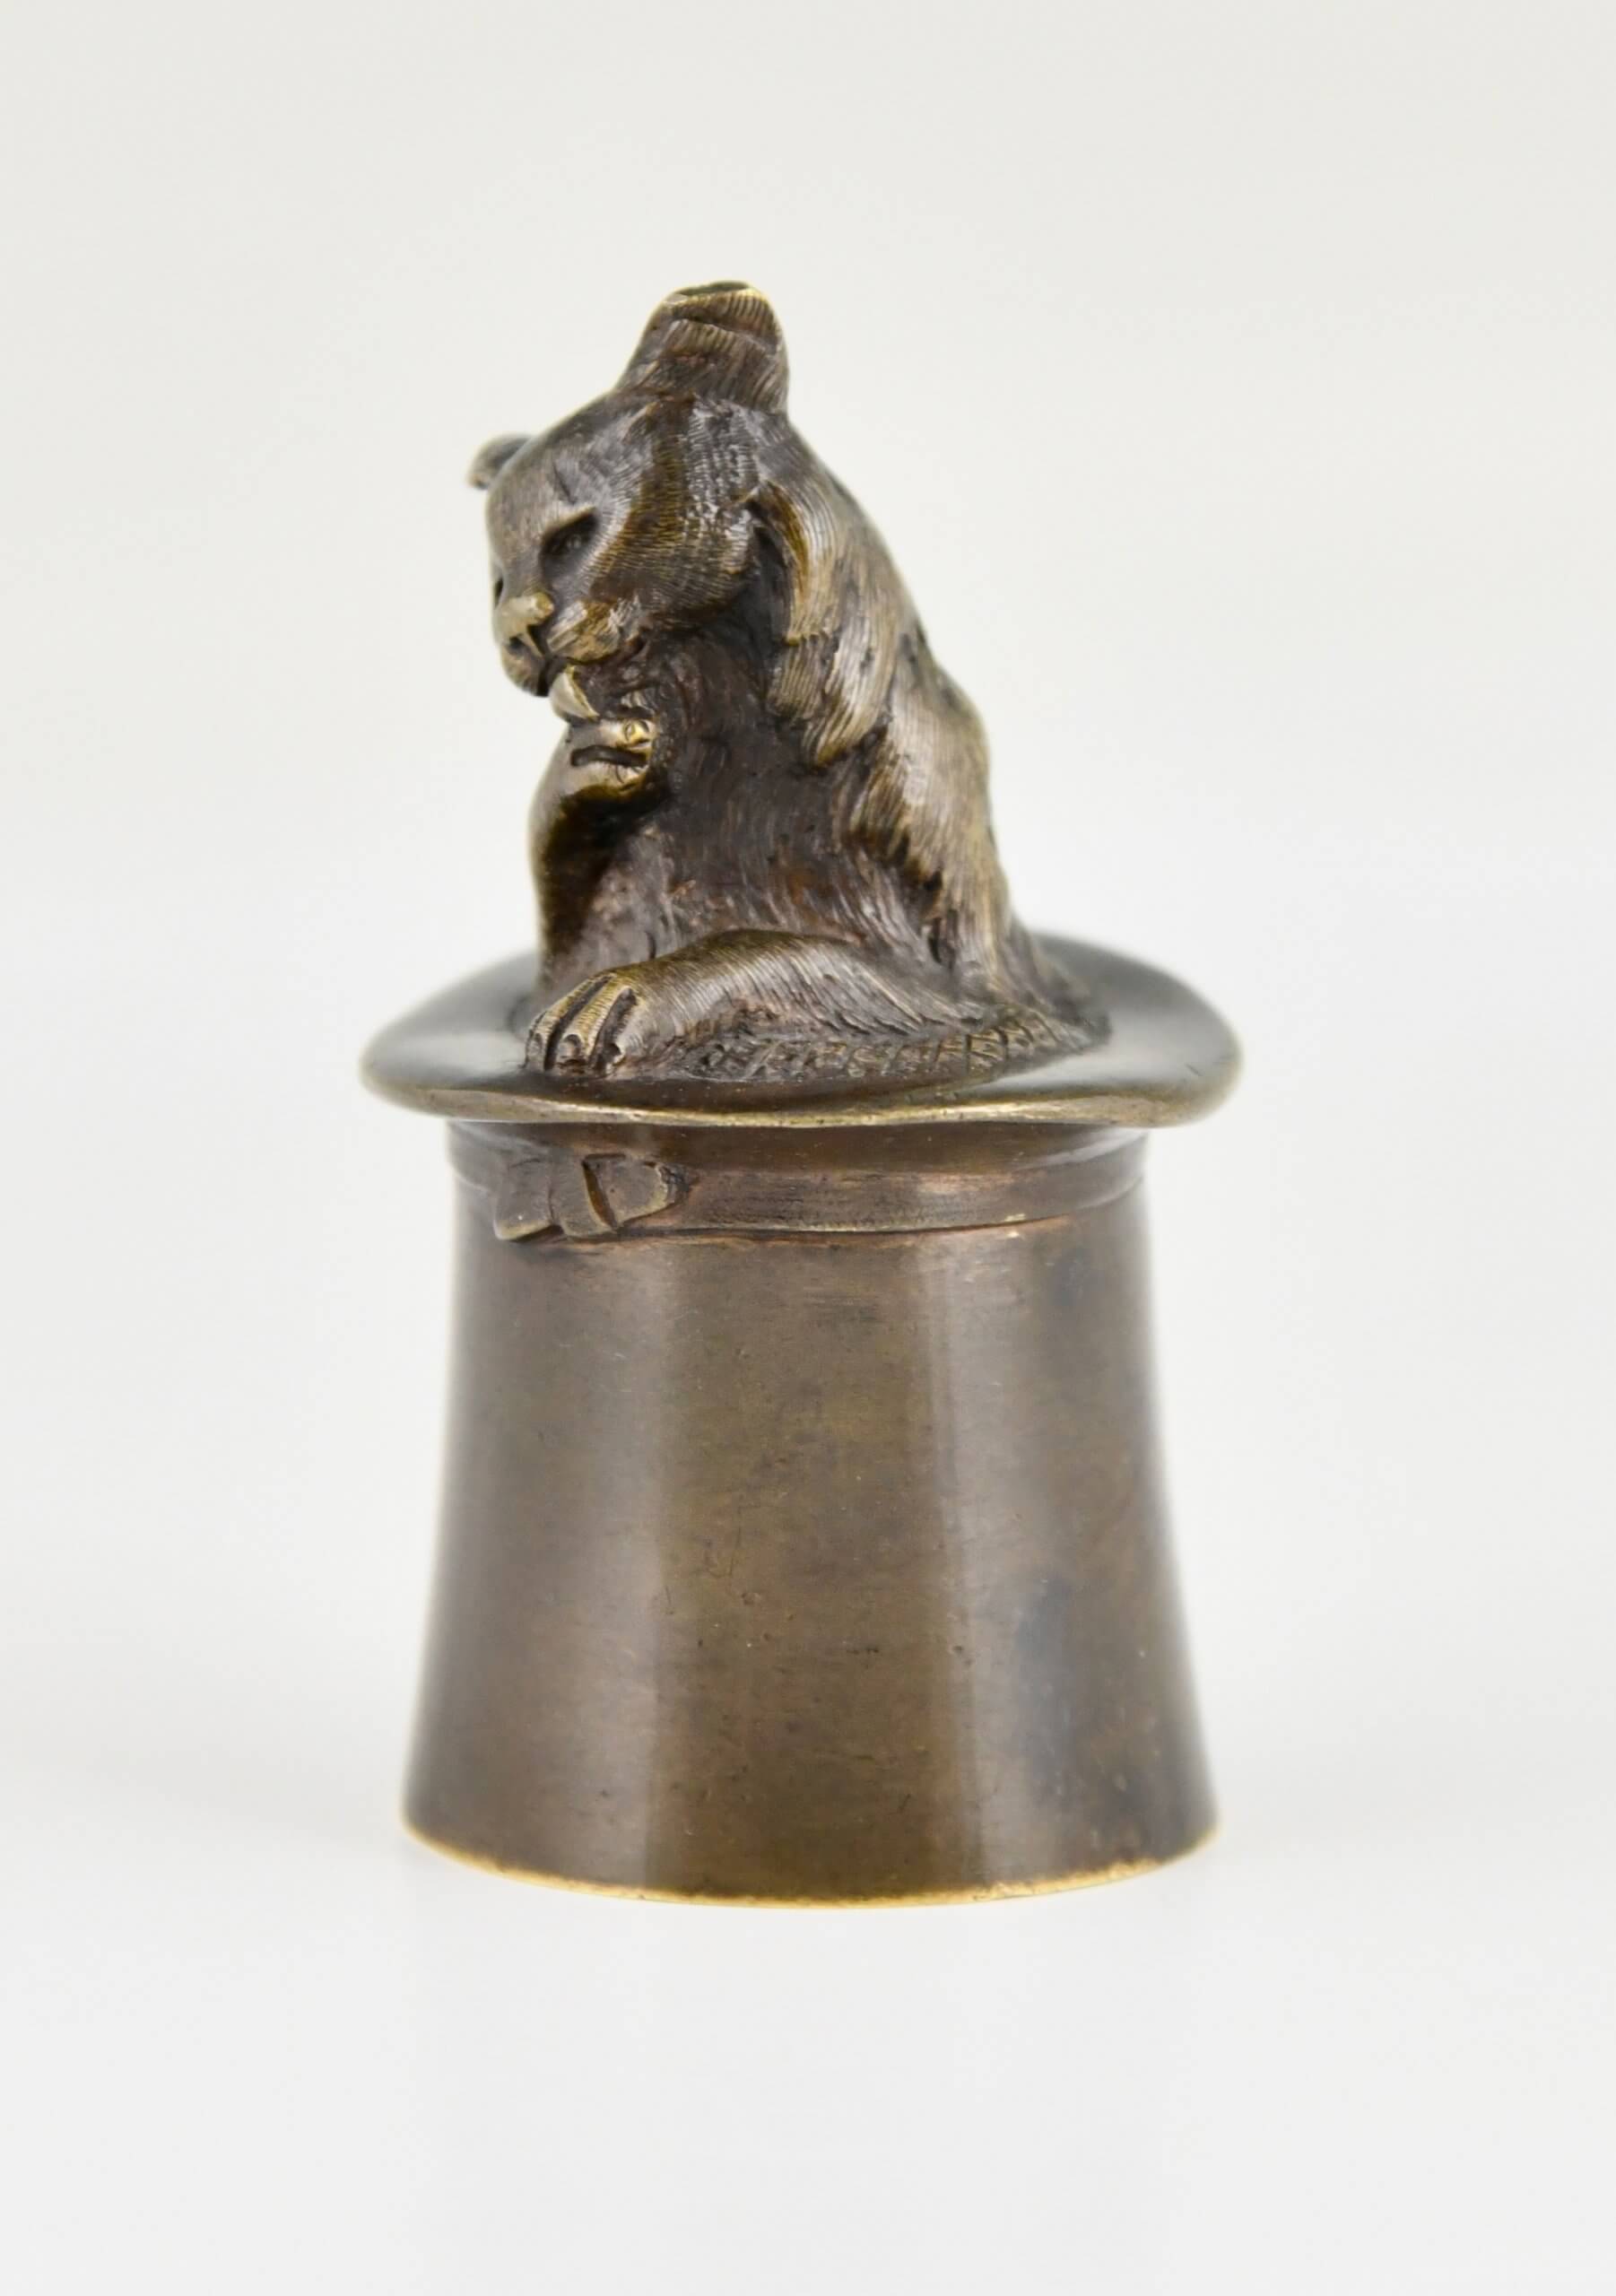 Antique bronze table bell cat in a top hat.